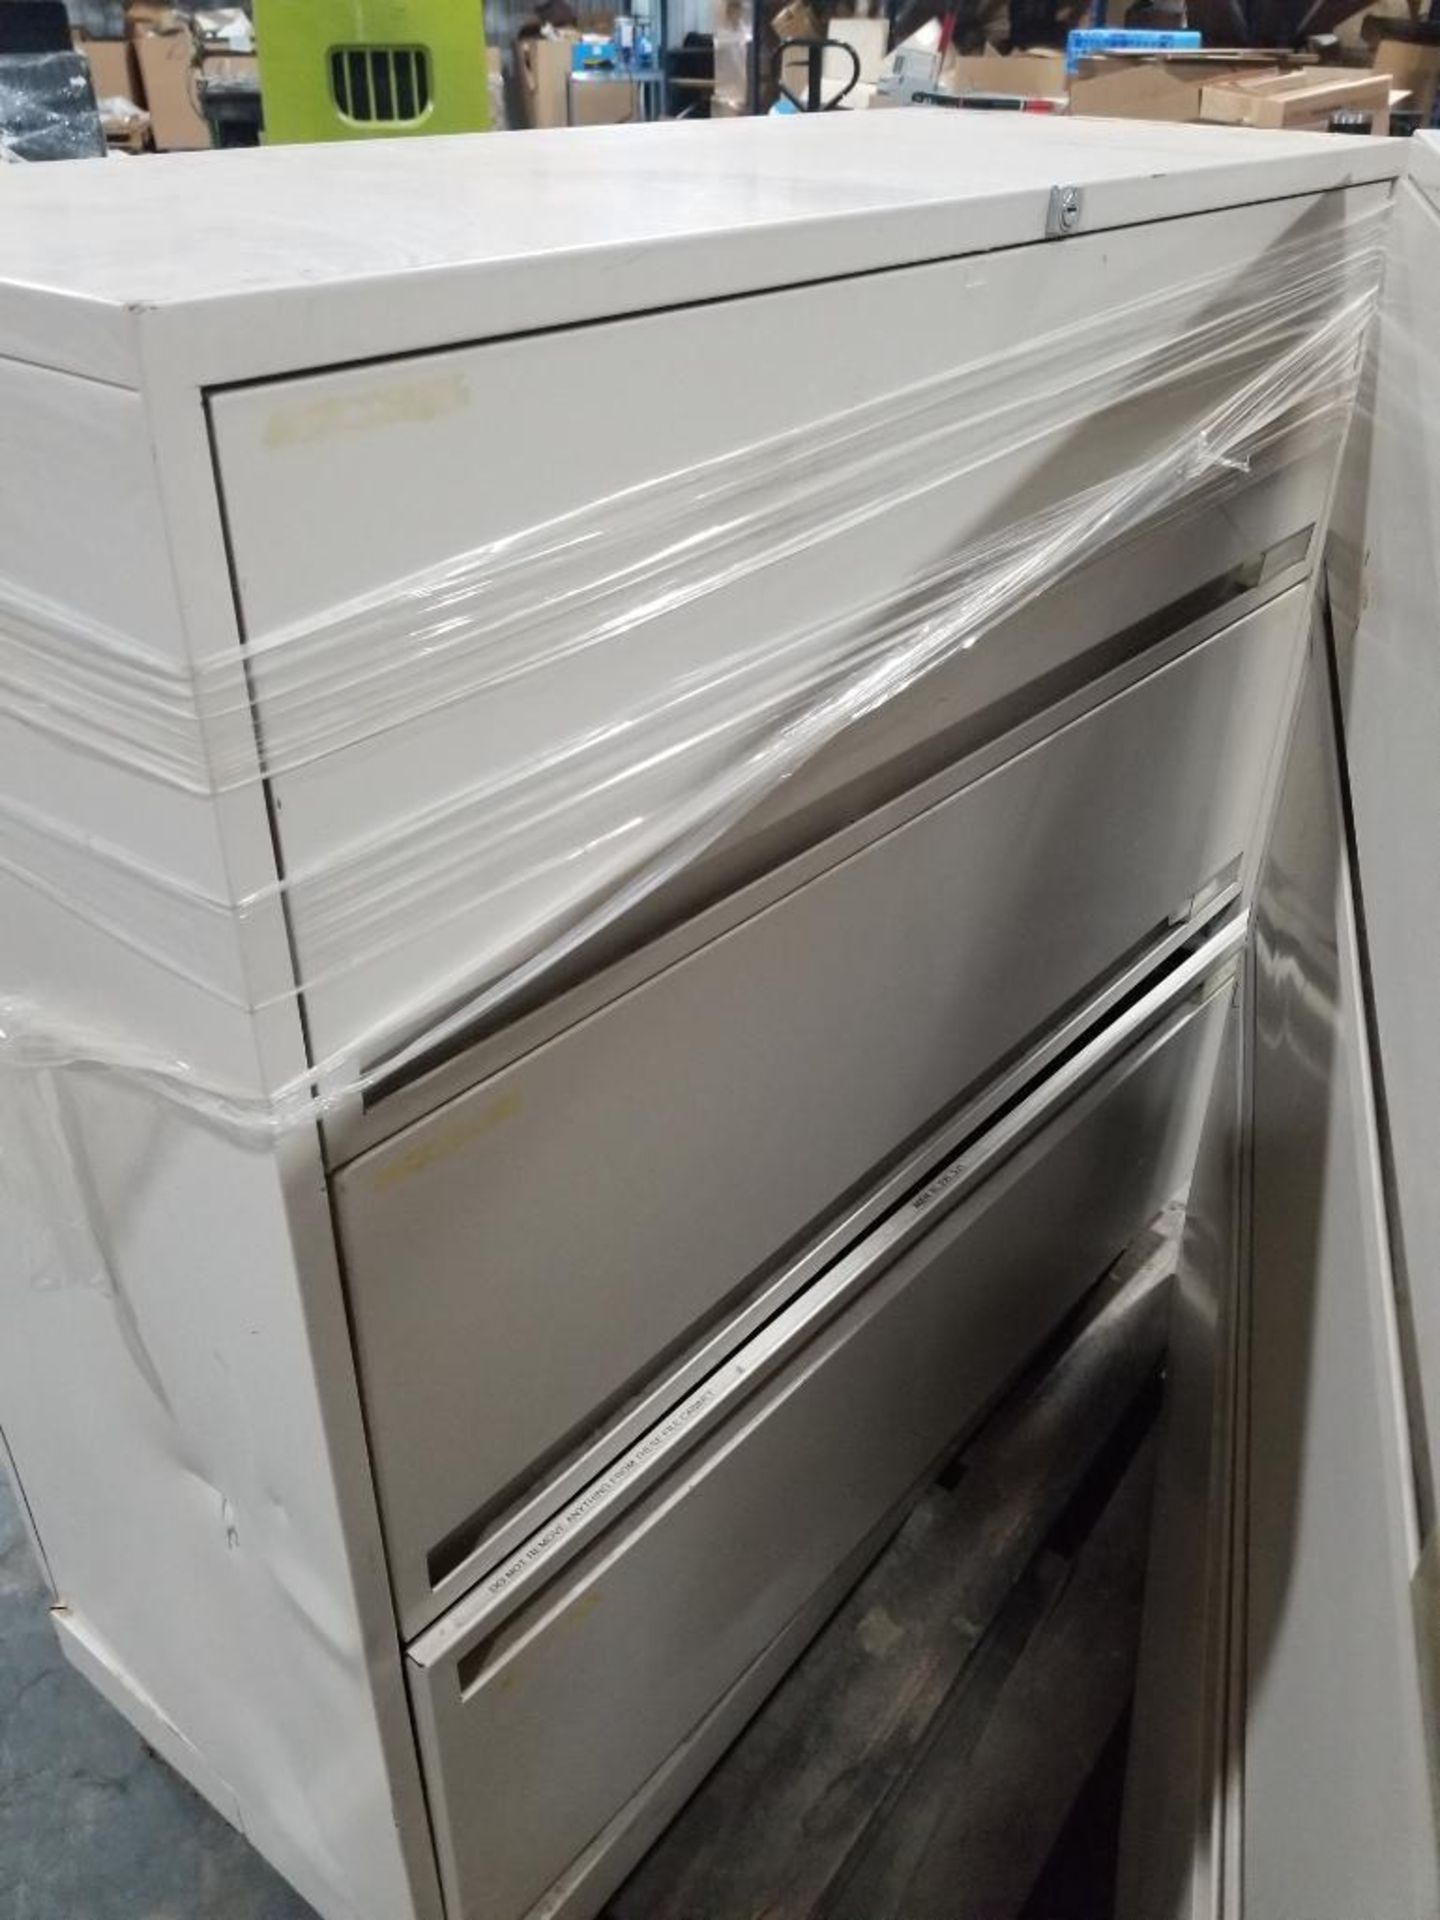 Qty 2 - Filing cabinets. - Image 4 of 9